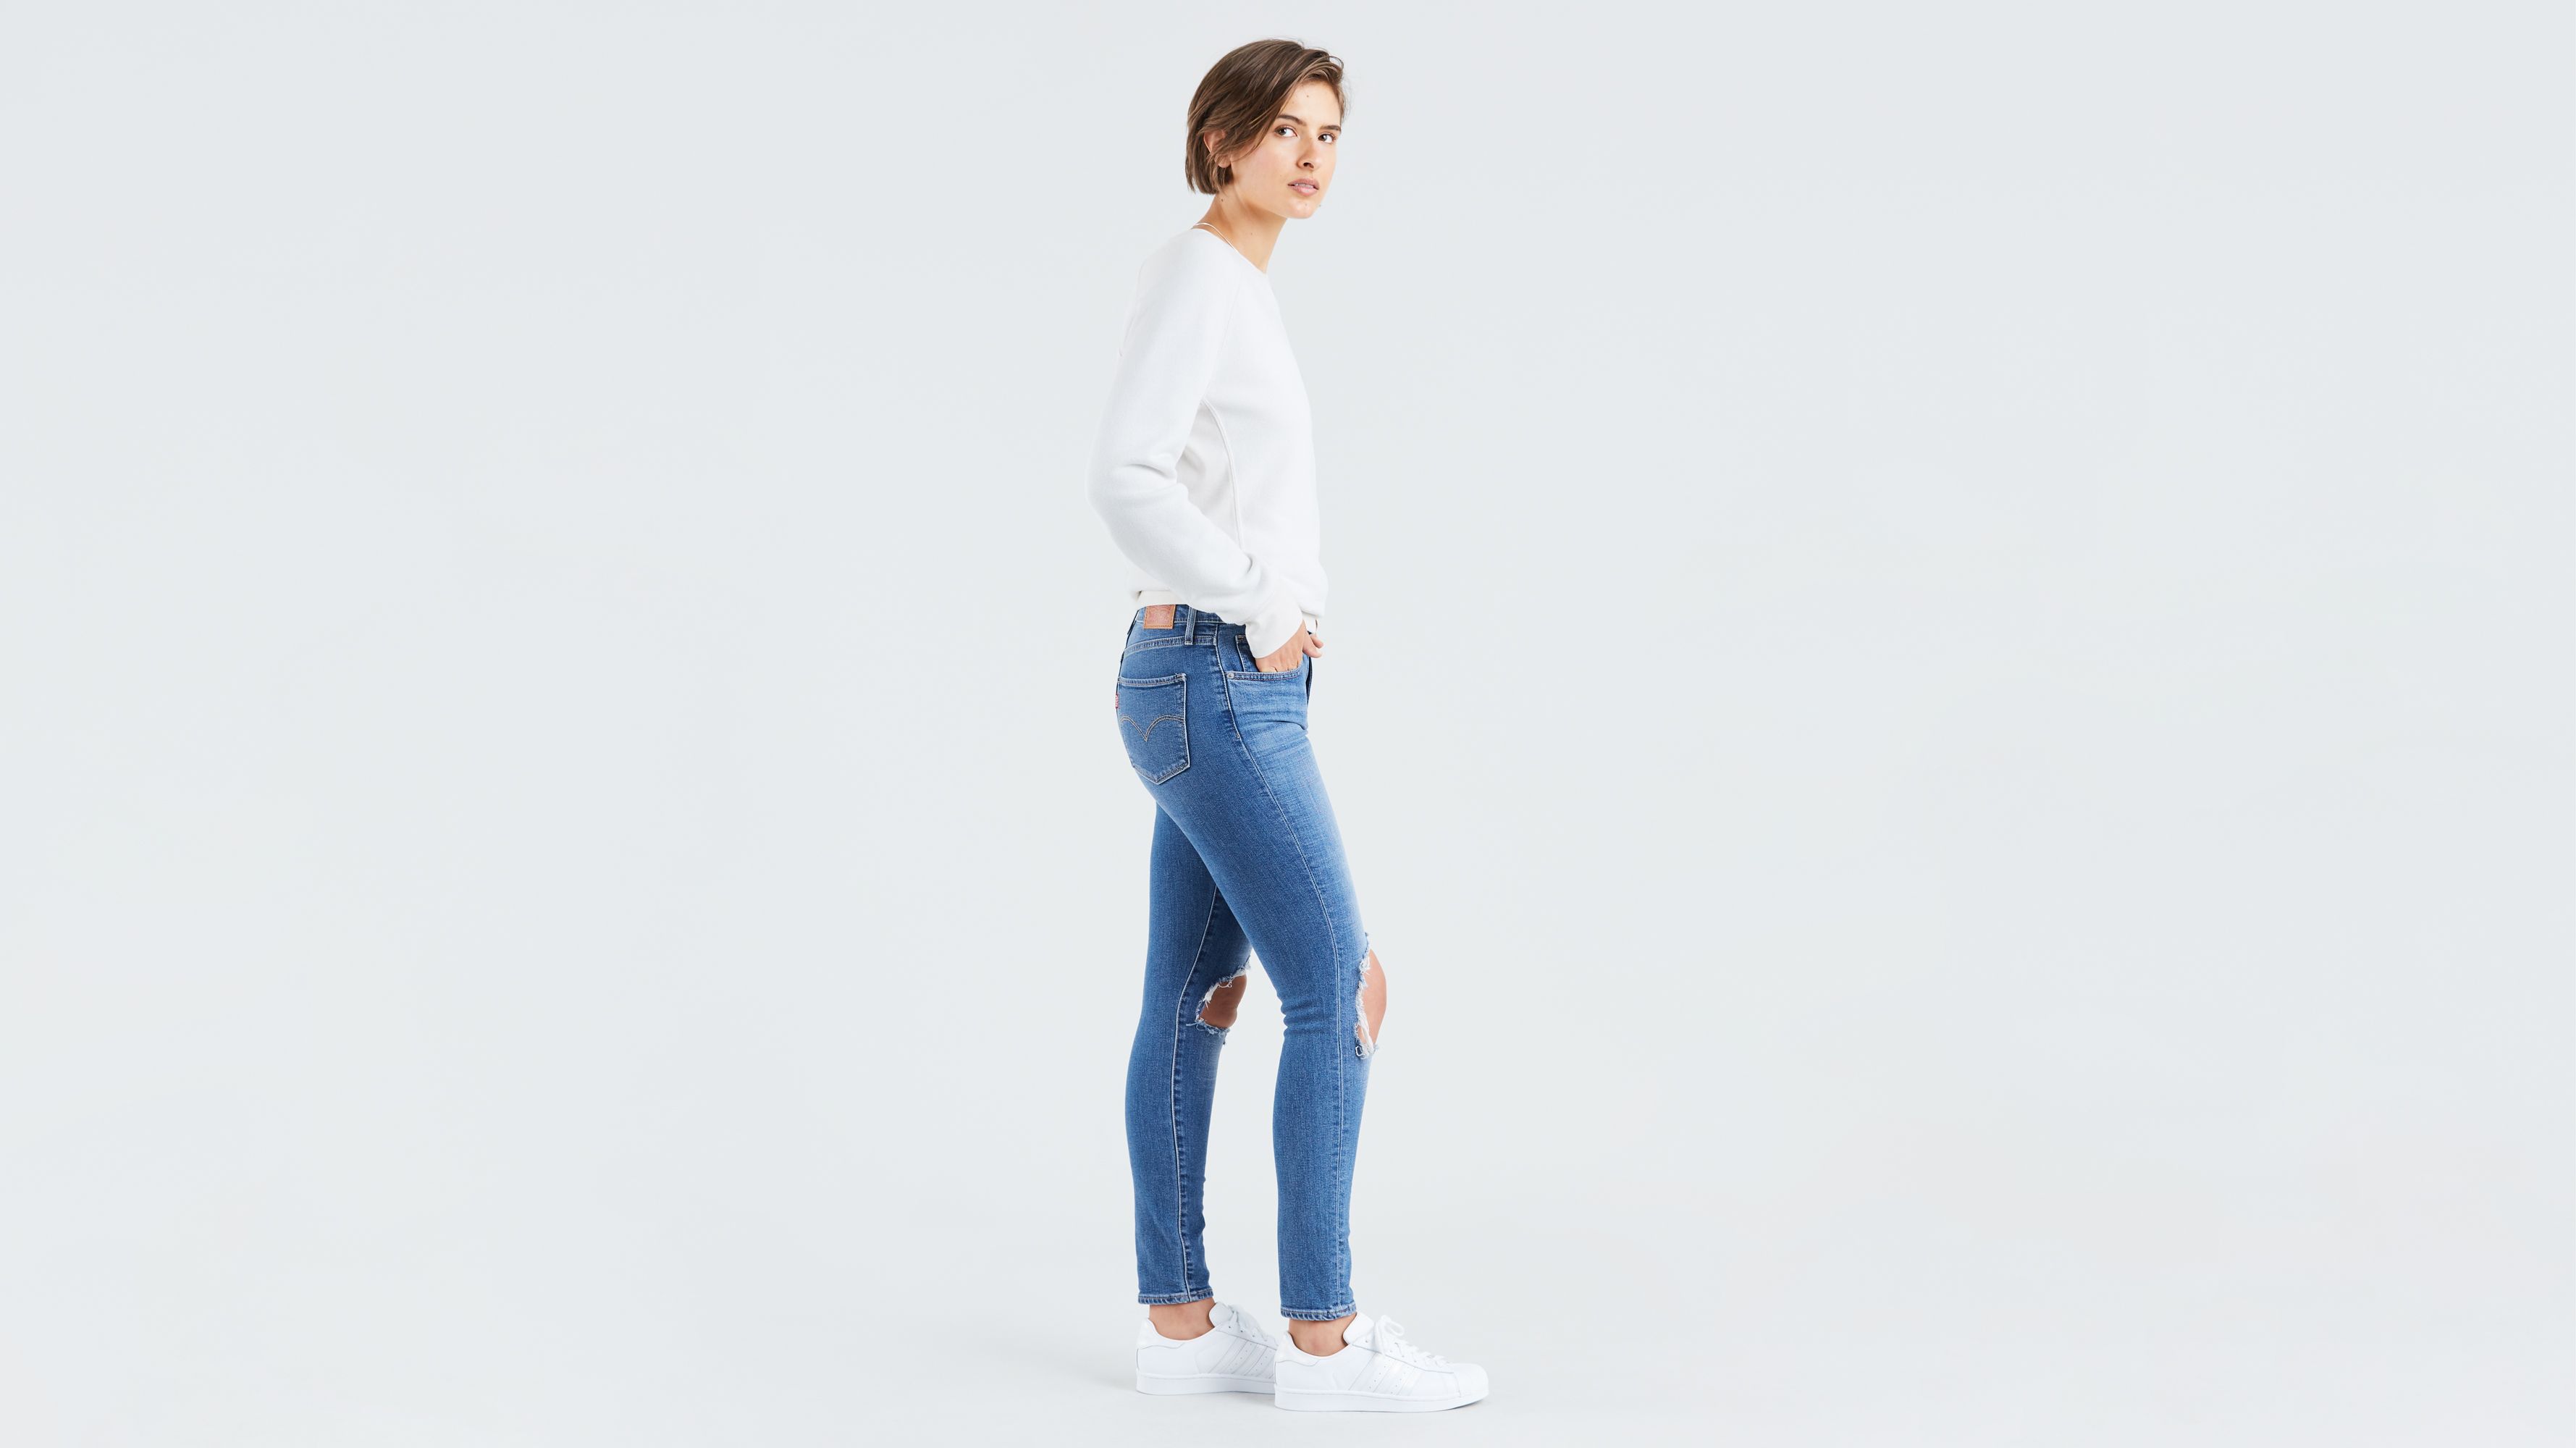 levi's 721 ripped jeans